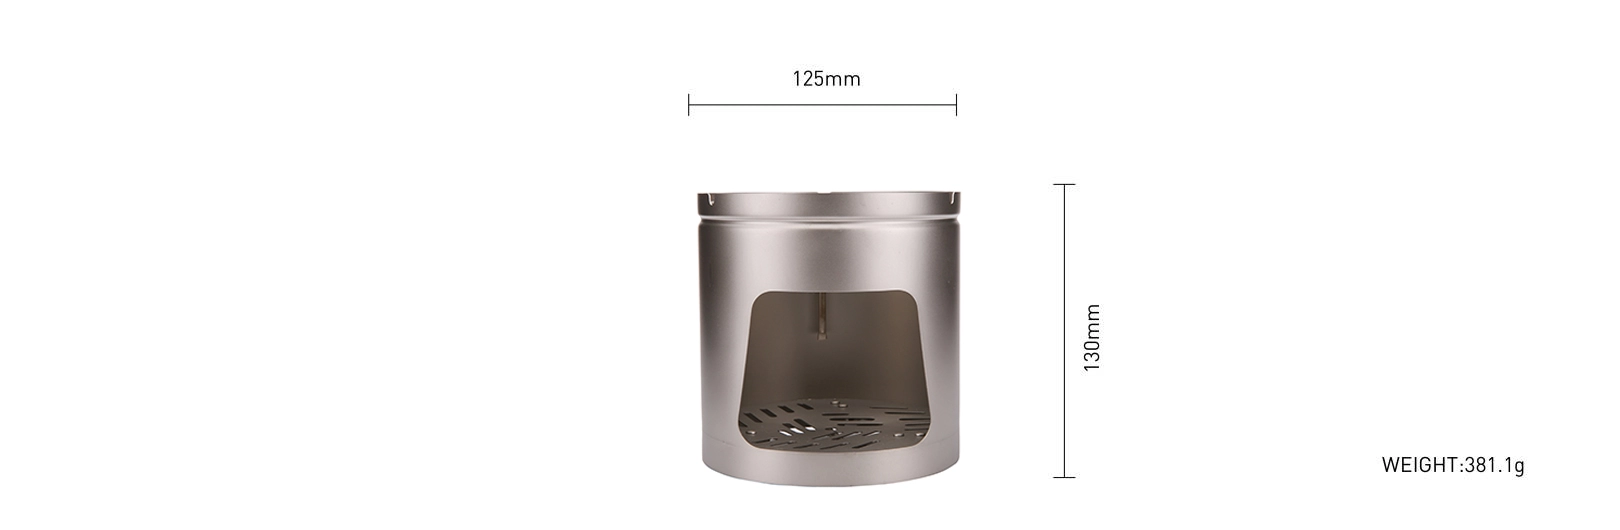 details of Ultralight Titanium Heat Resistant Portable Wood Burning Stove for Hiking Picnic